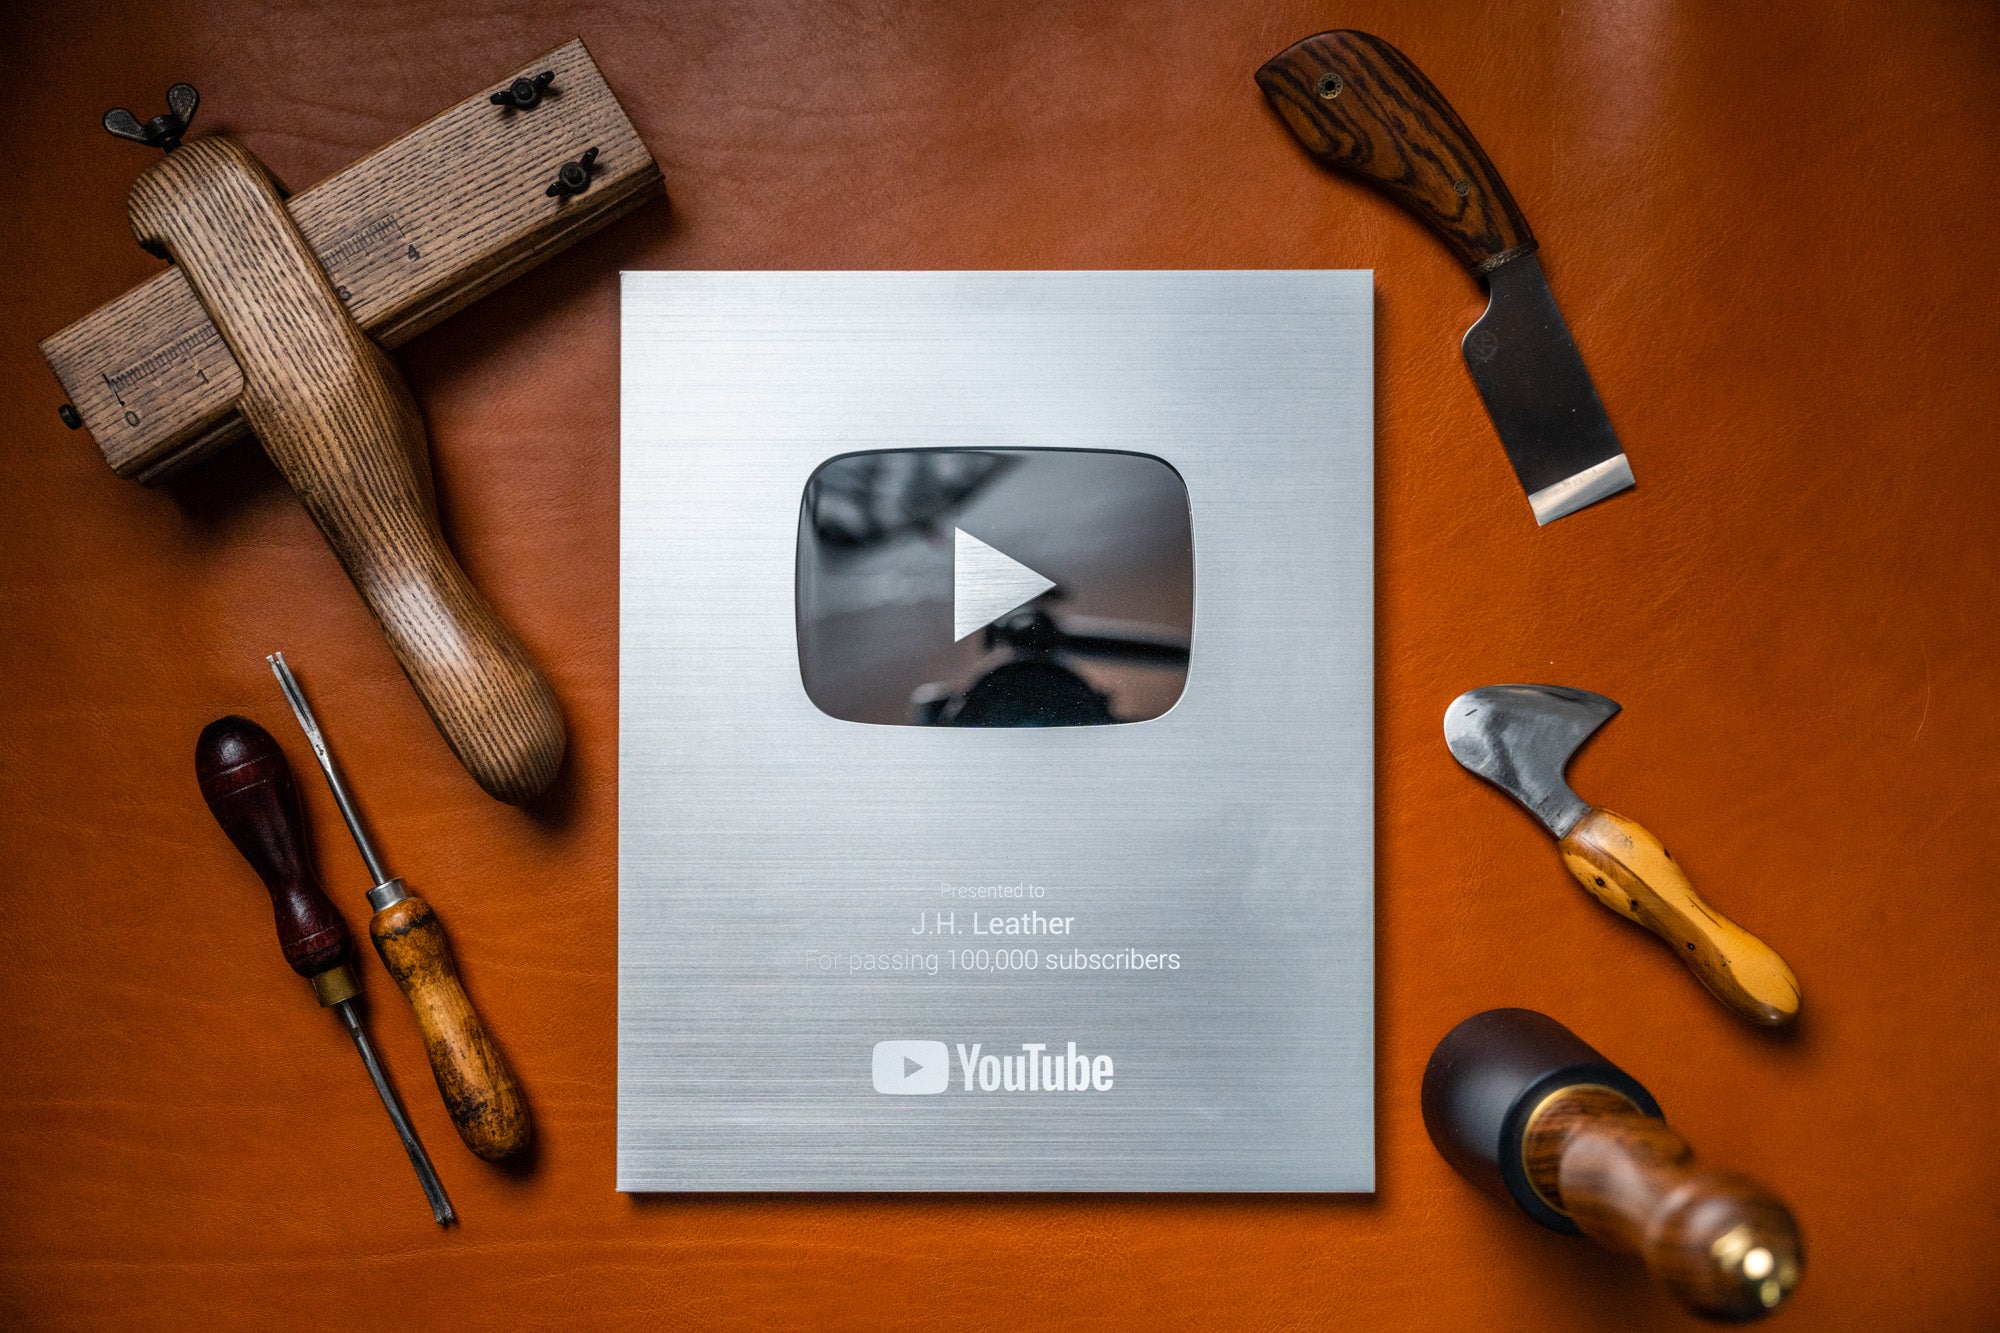 J.H.Leather's Silver YouTube Play Award for 100,000 subscribers